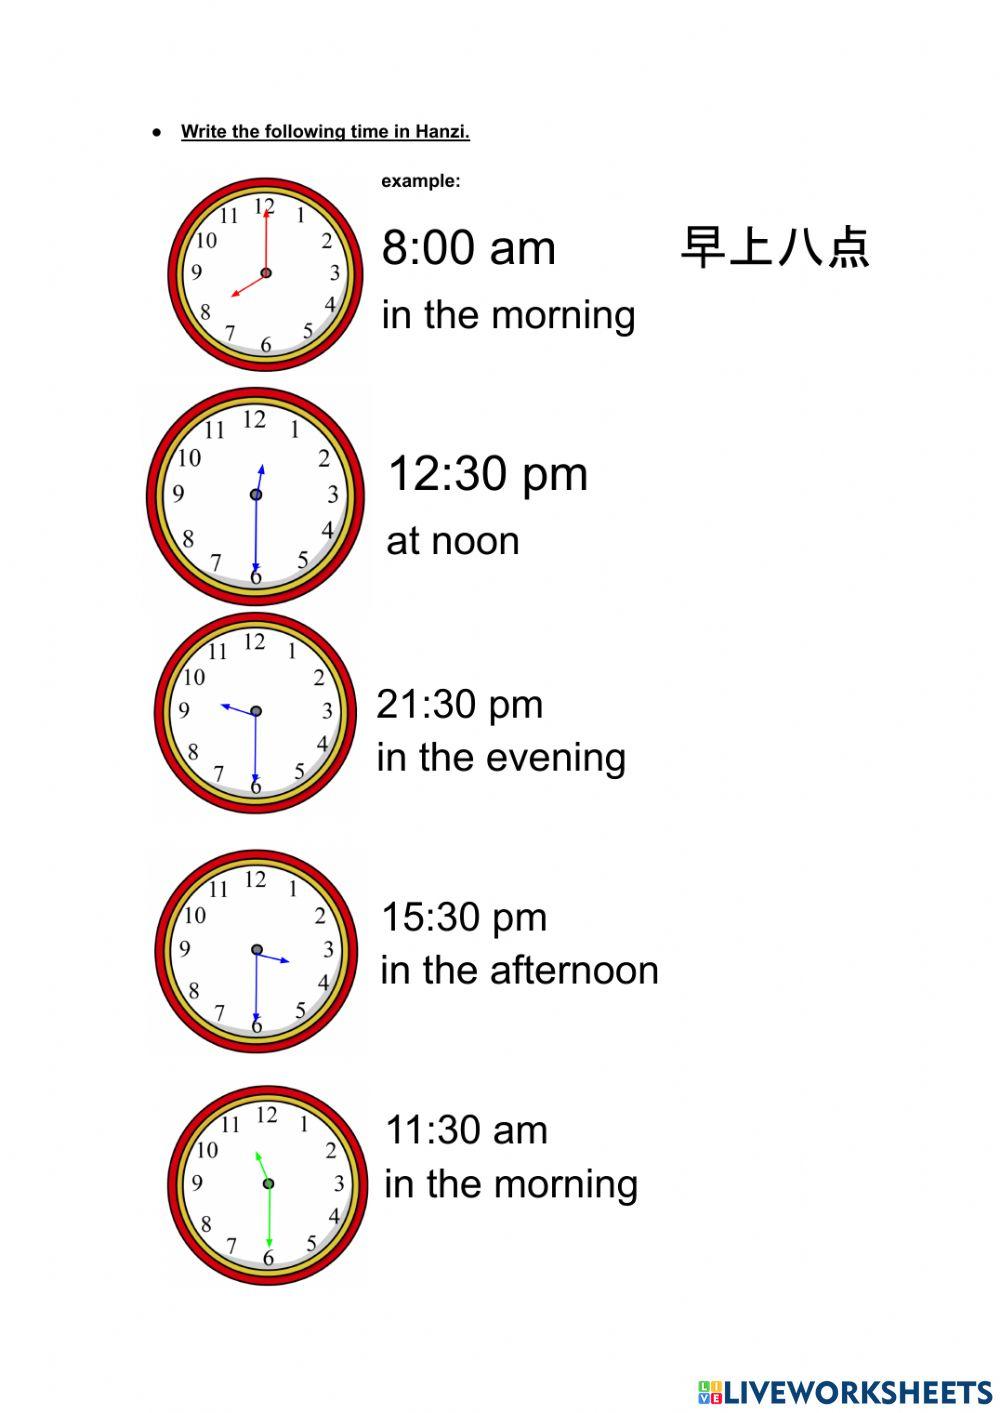 Time expression in Chinese